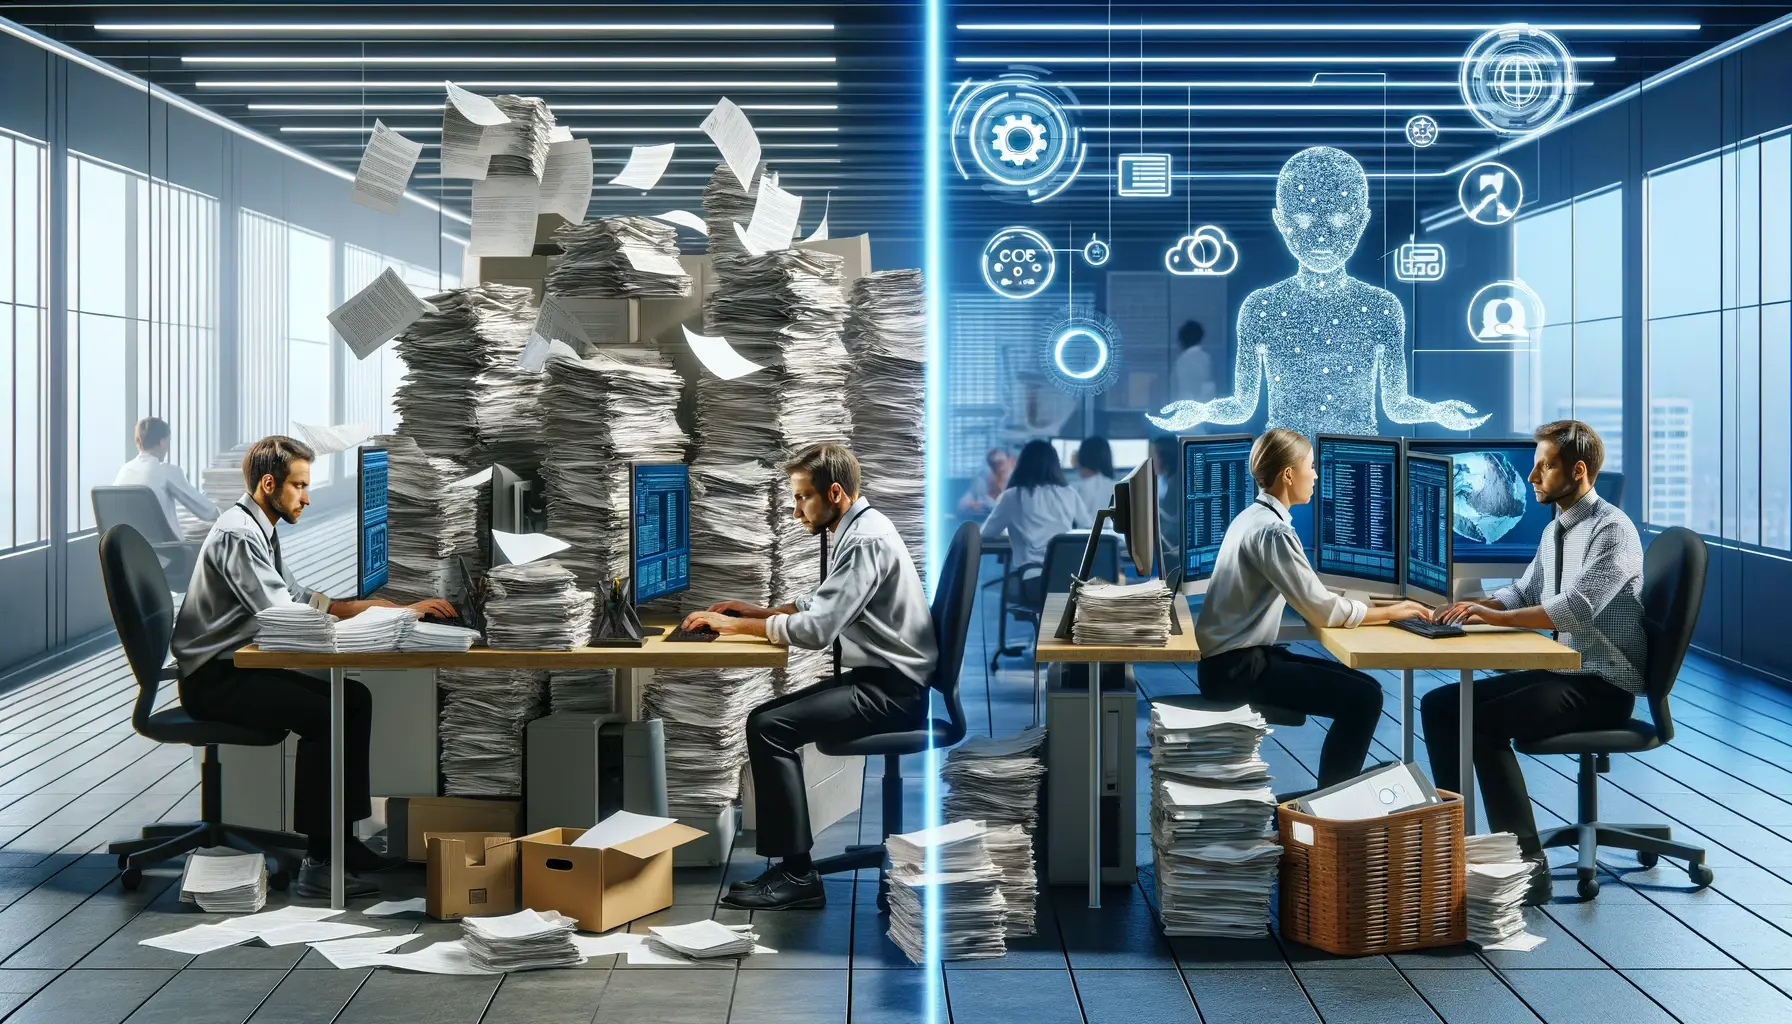 An office scene depicting the evolution from manual to automated processes. On the left, a frustrated employee is overwhelmed by paper stacks and manually enters data on a computer. On the right, a relaxed employee oversees a streamlined digital workflow displayed on multiple monitors, enhanced by AI technology icons like OCR and analytics. The setting includes modern office furnishings, illustrating the shift from traditional to advanced work methods.